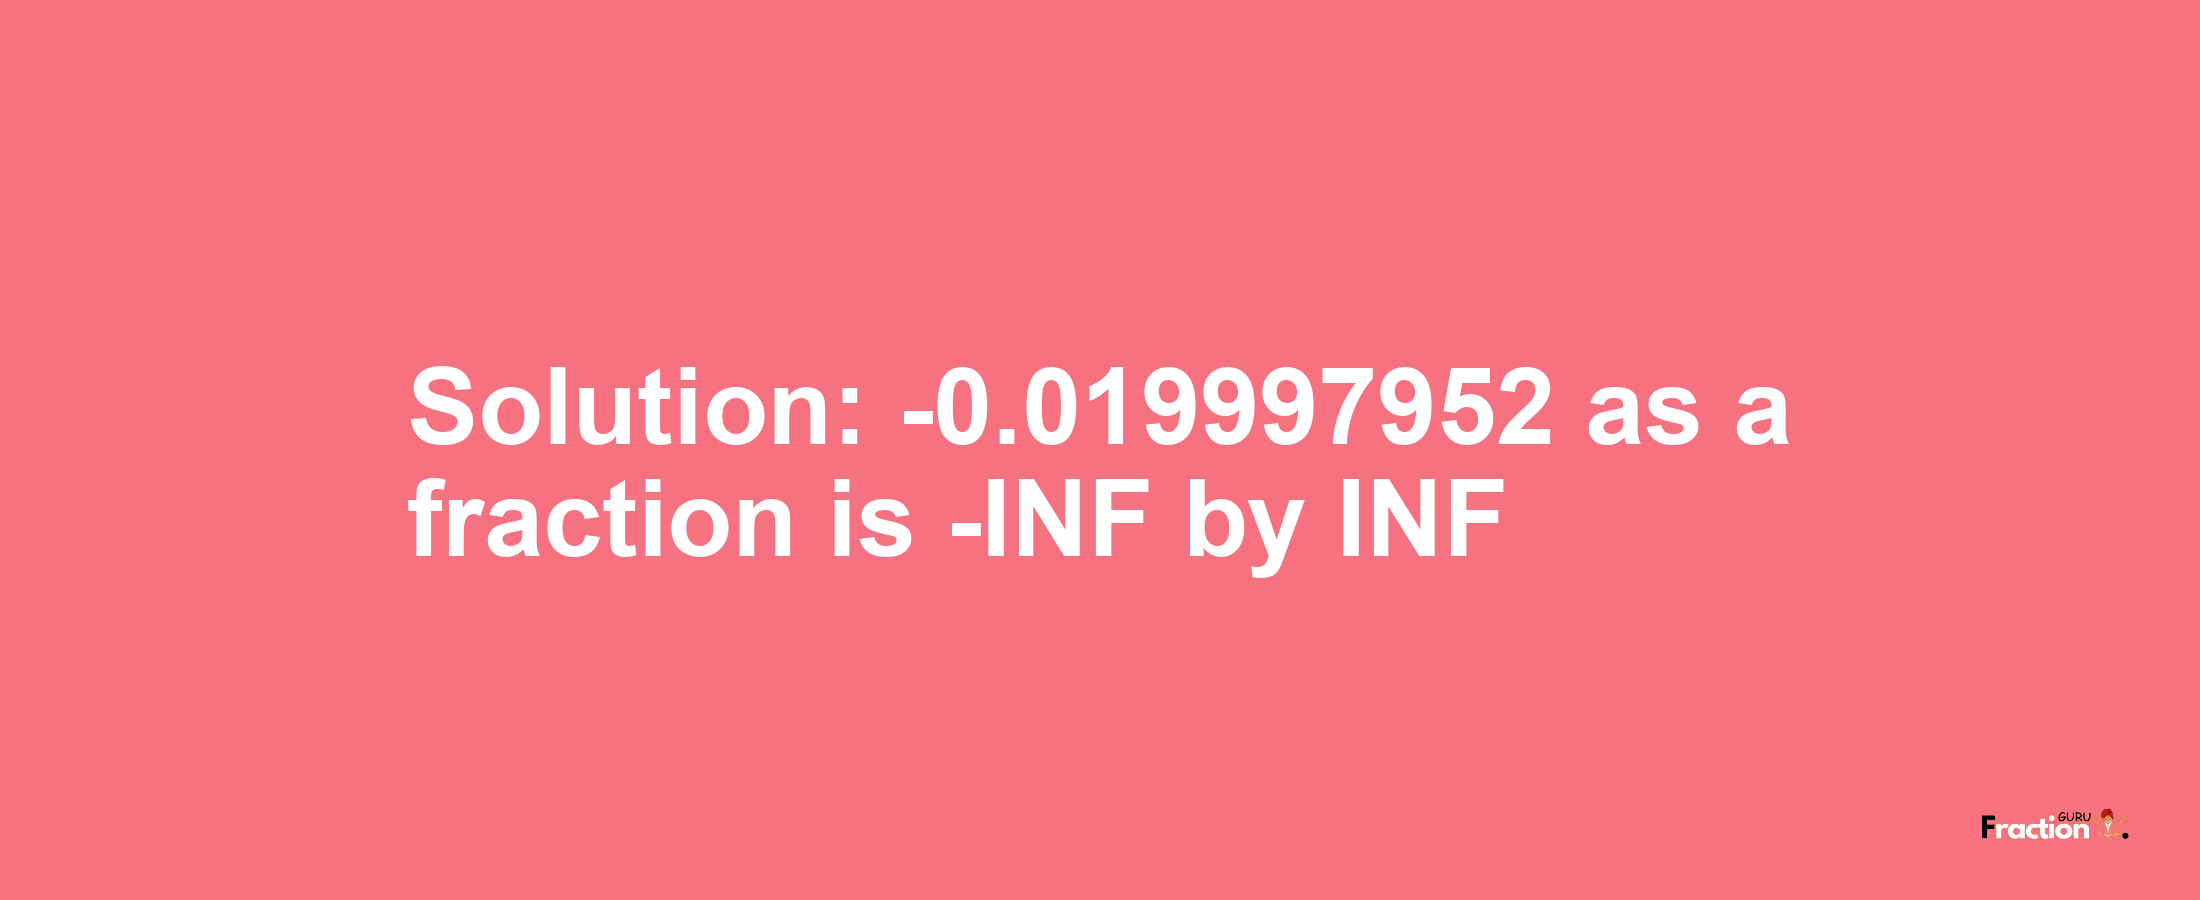 Solution:-0.019997952 as a fraction is -INF/INF